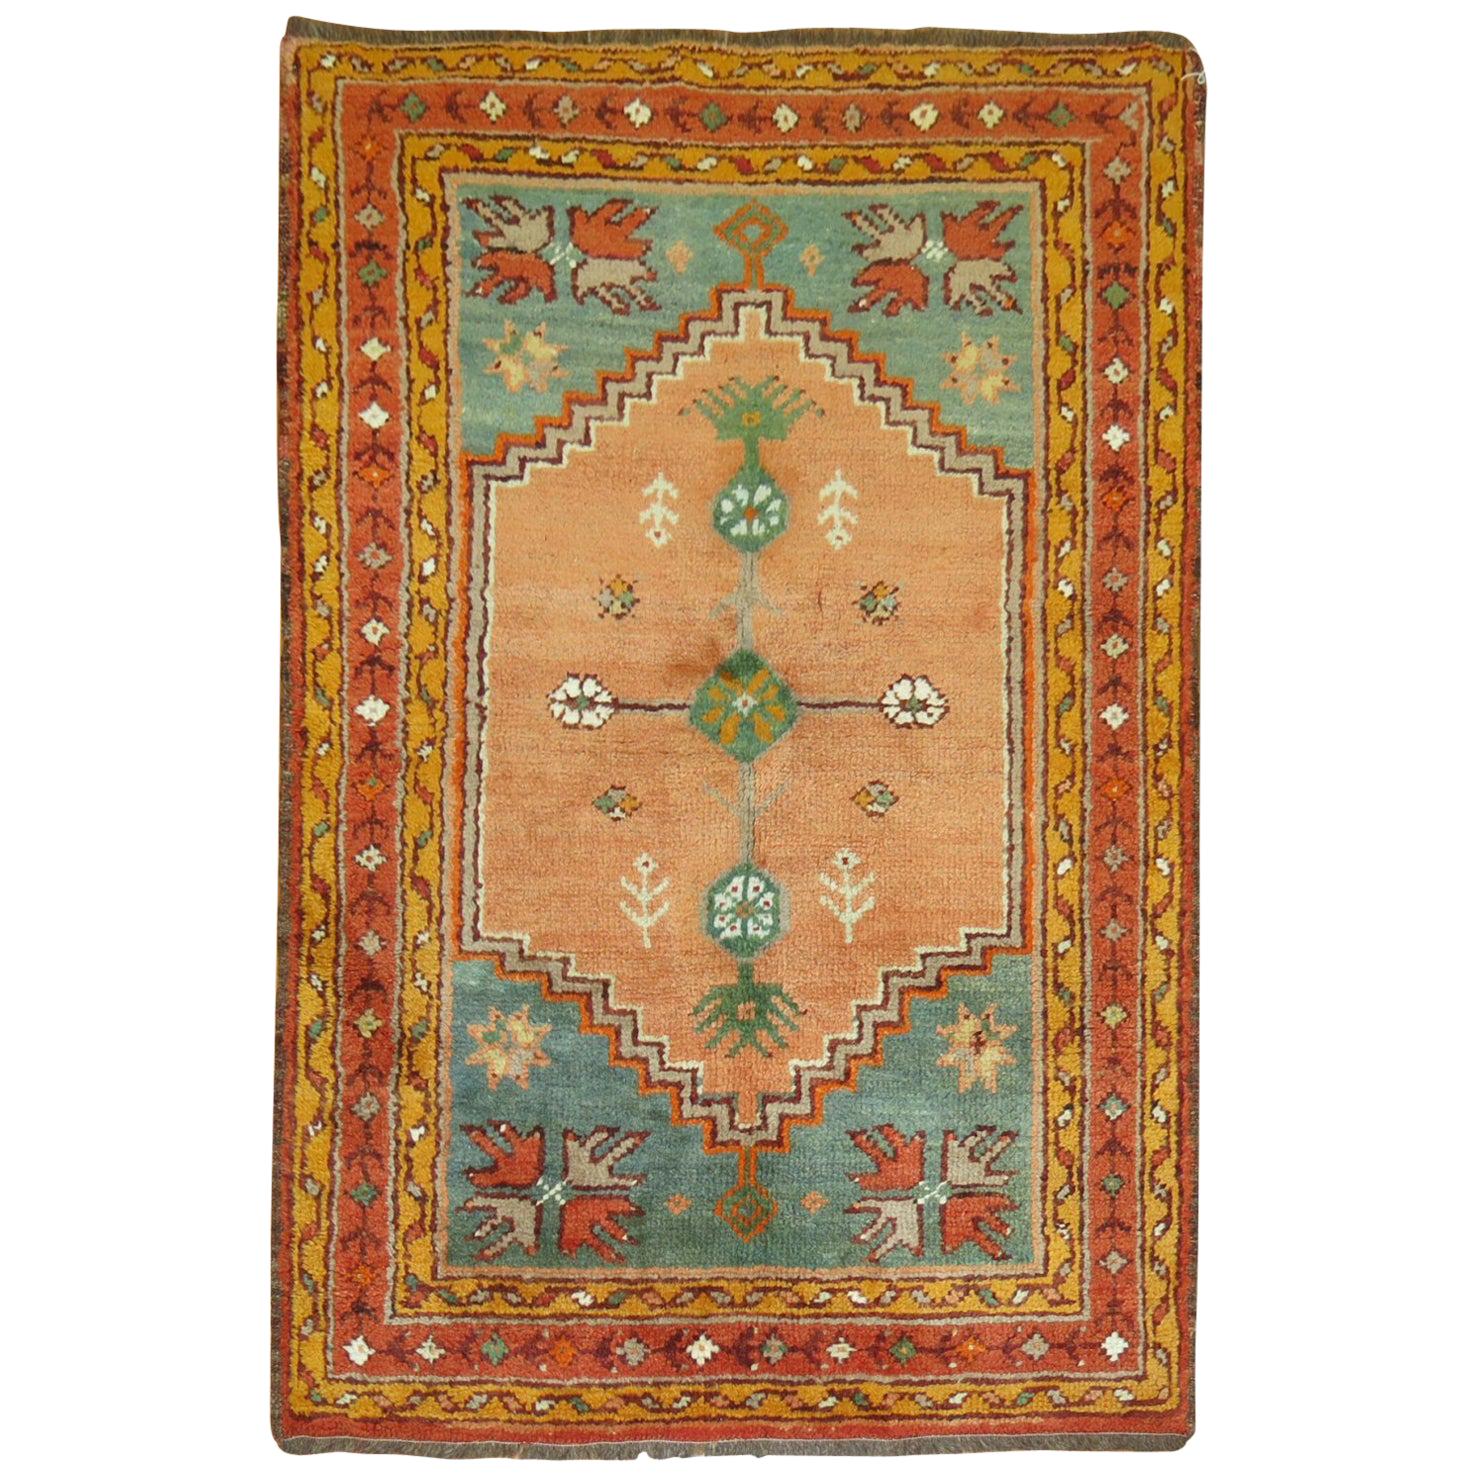 Colorful Antique Oushak Teal Orange Rug, Early 20th Century